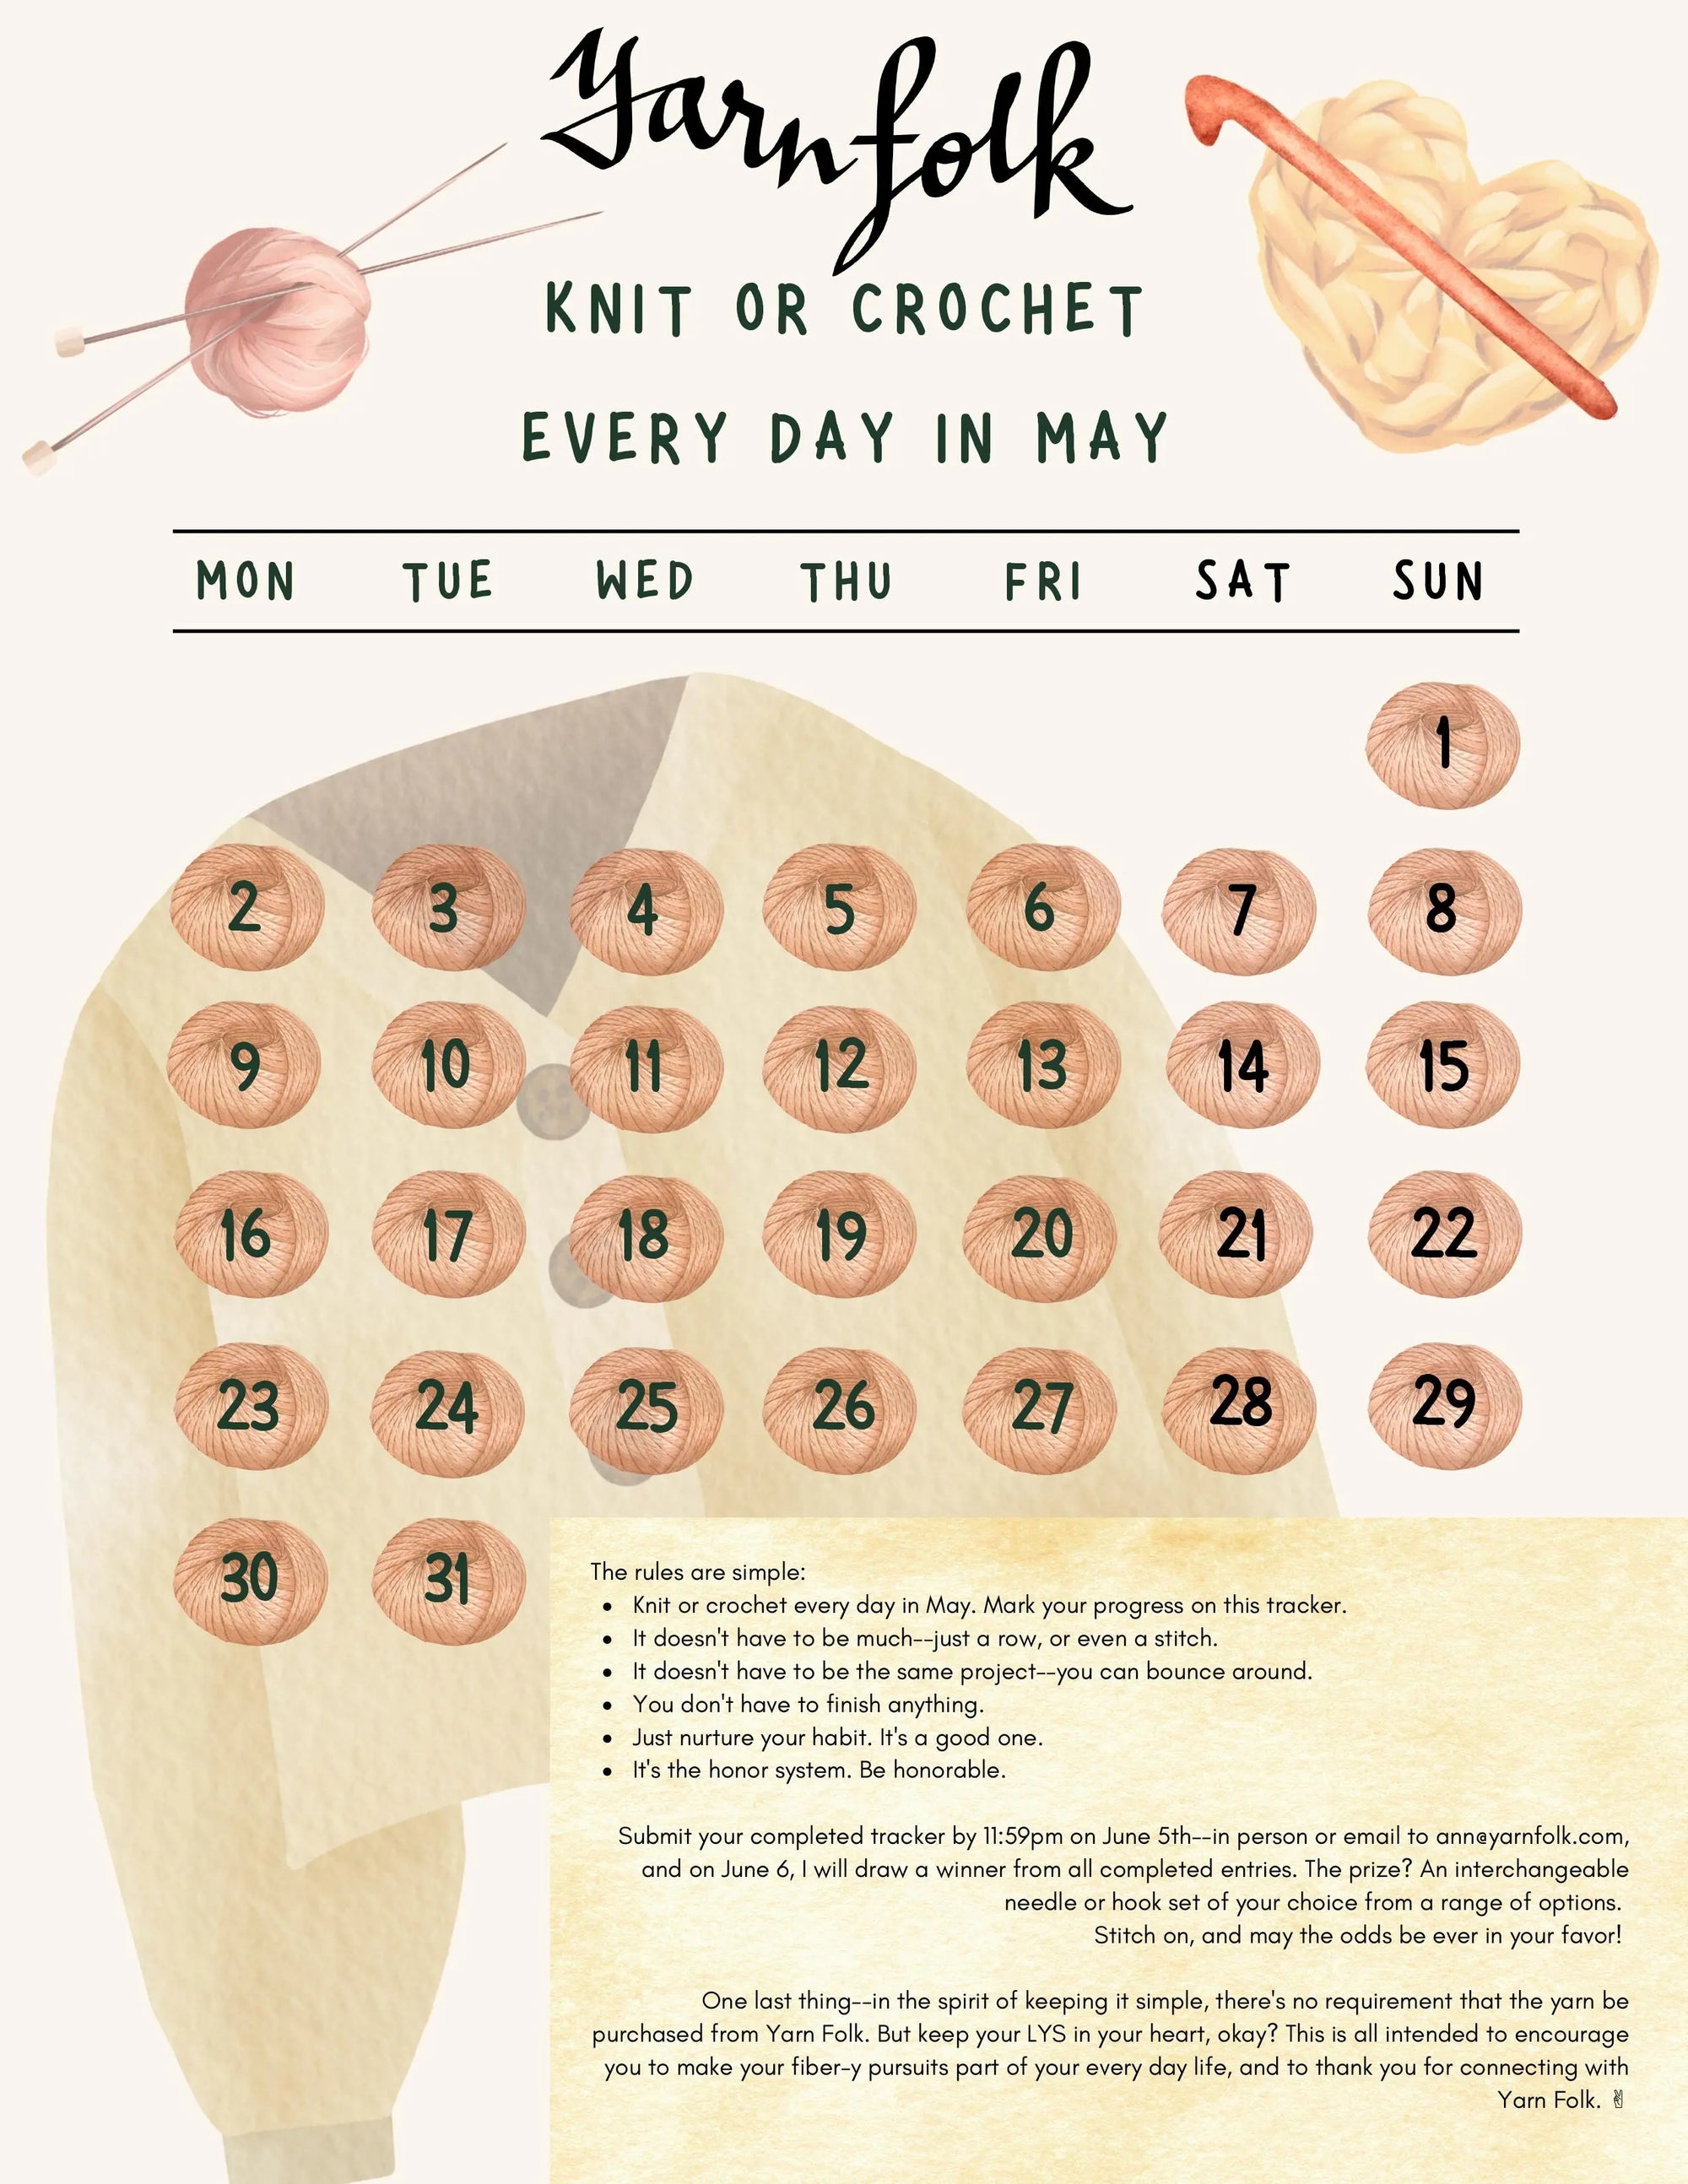 4 Day KAL yarn suggestions--and it's time to send in your Knit or Crochet Every Day in May entries! Yarn Folk